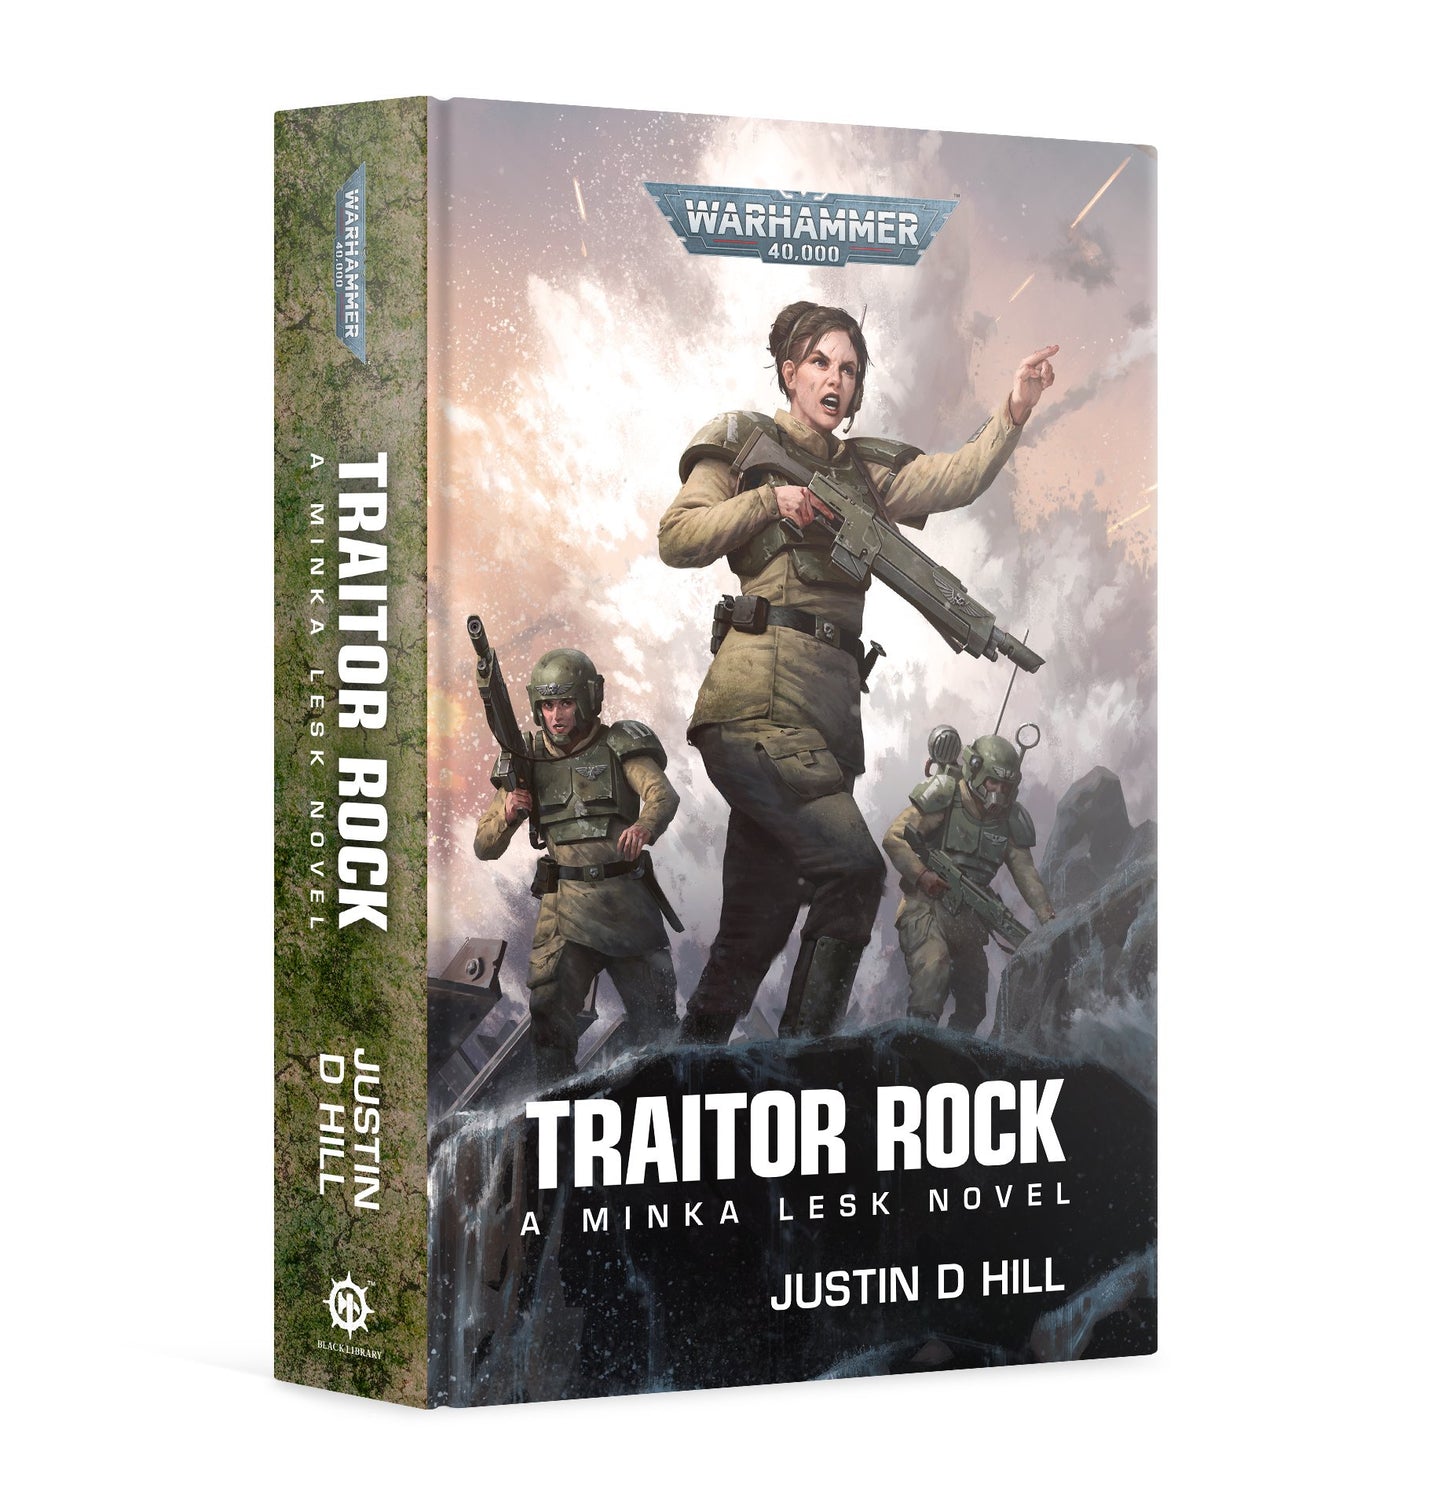 40K TRAITOR ROCK BY JUSTIN D HILL HC